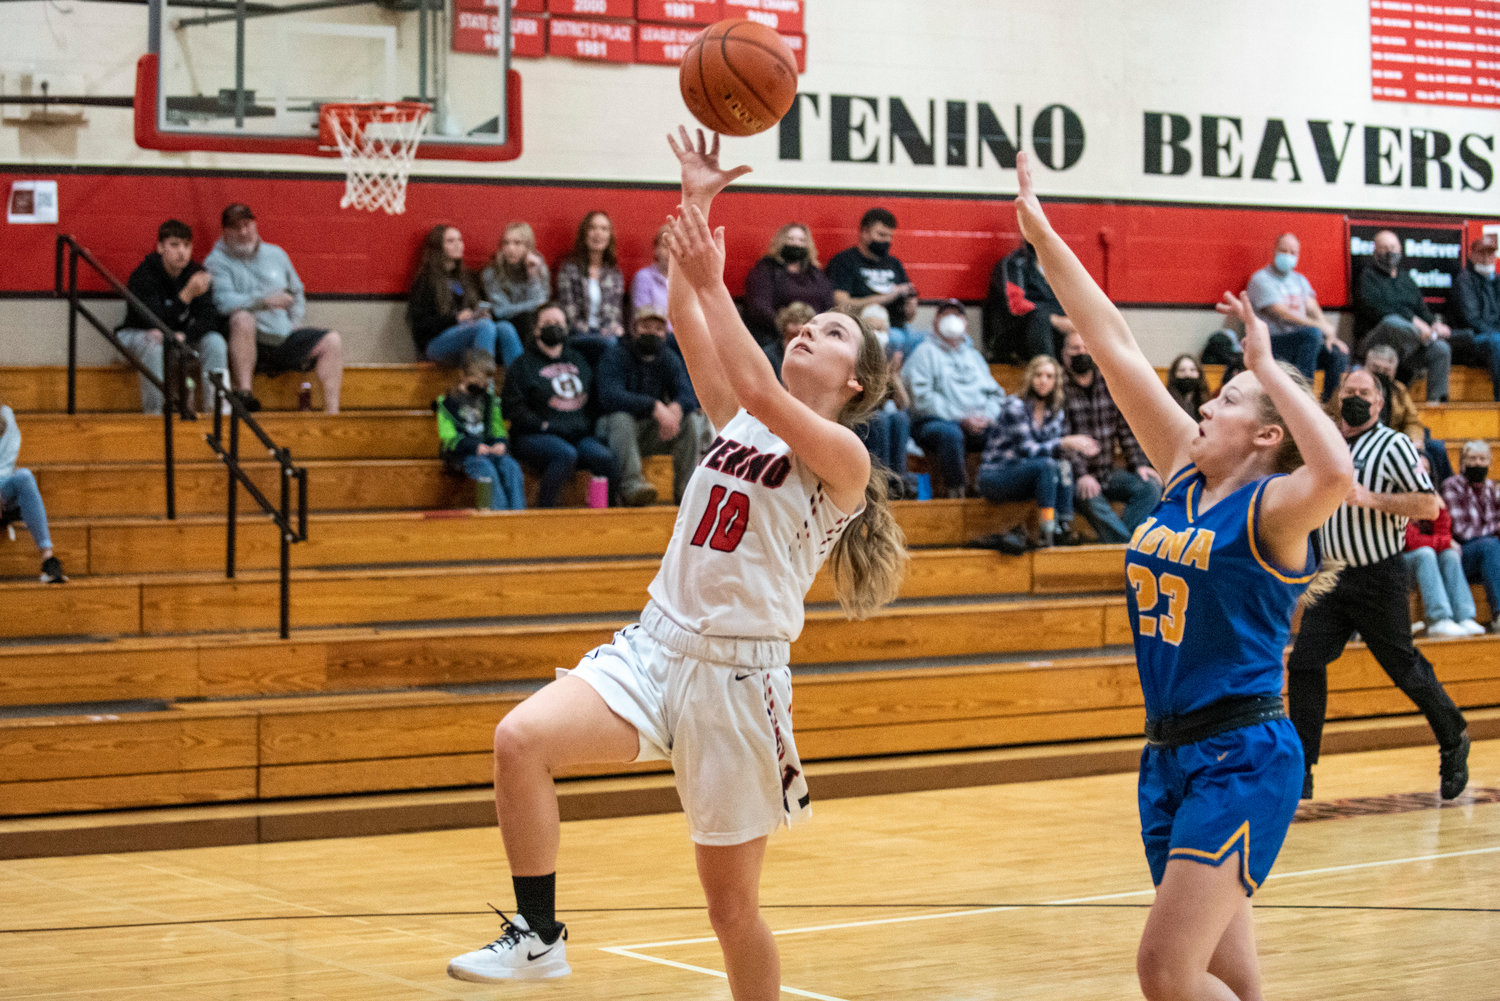 Tenino's Grace Vestal (10) throws up a layin against Adna's Kendall Humphrey (23) on Dec. 11.